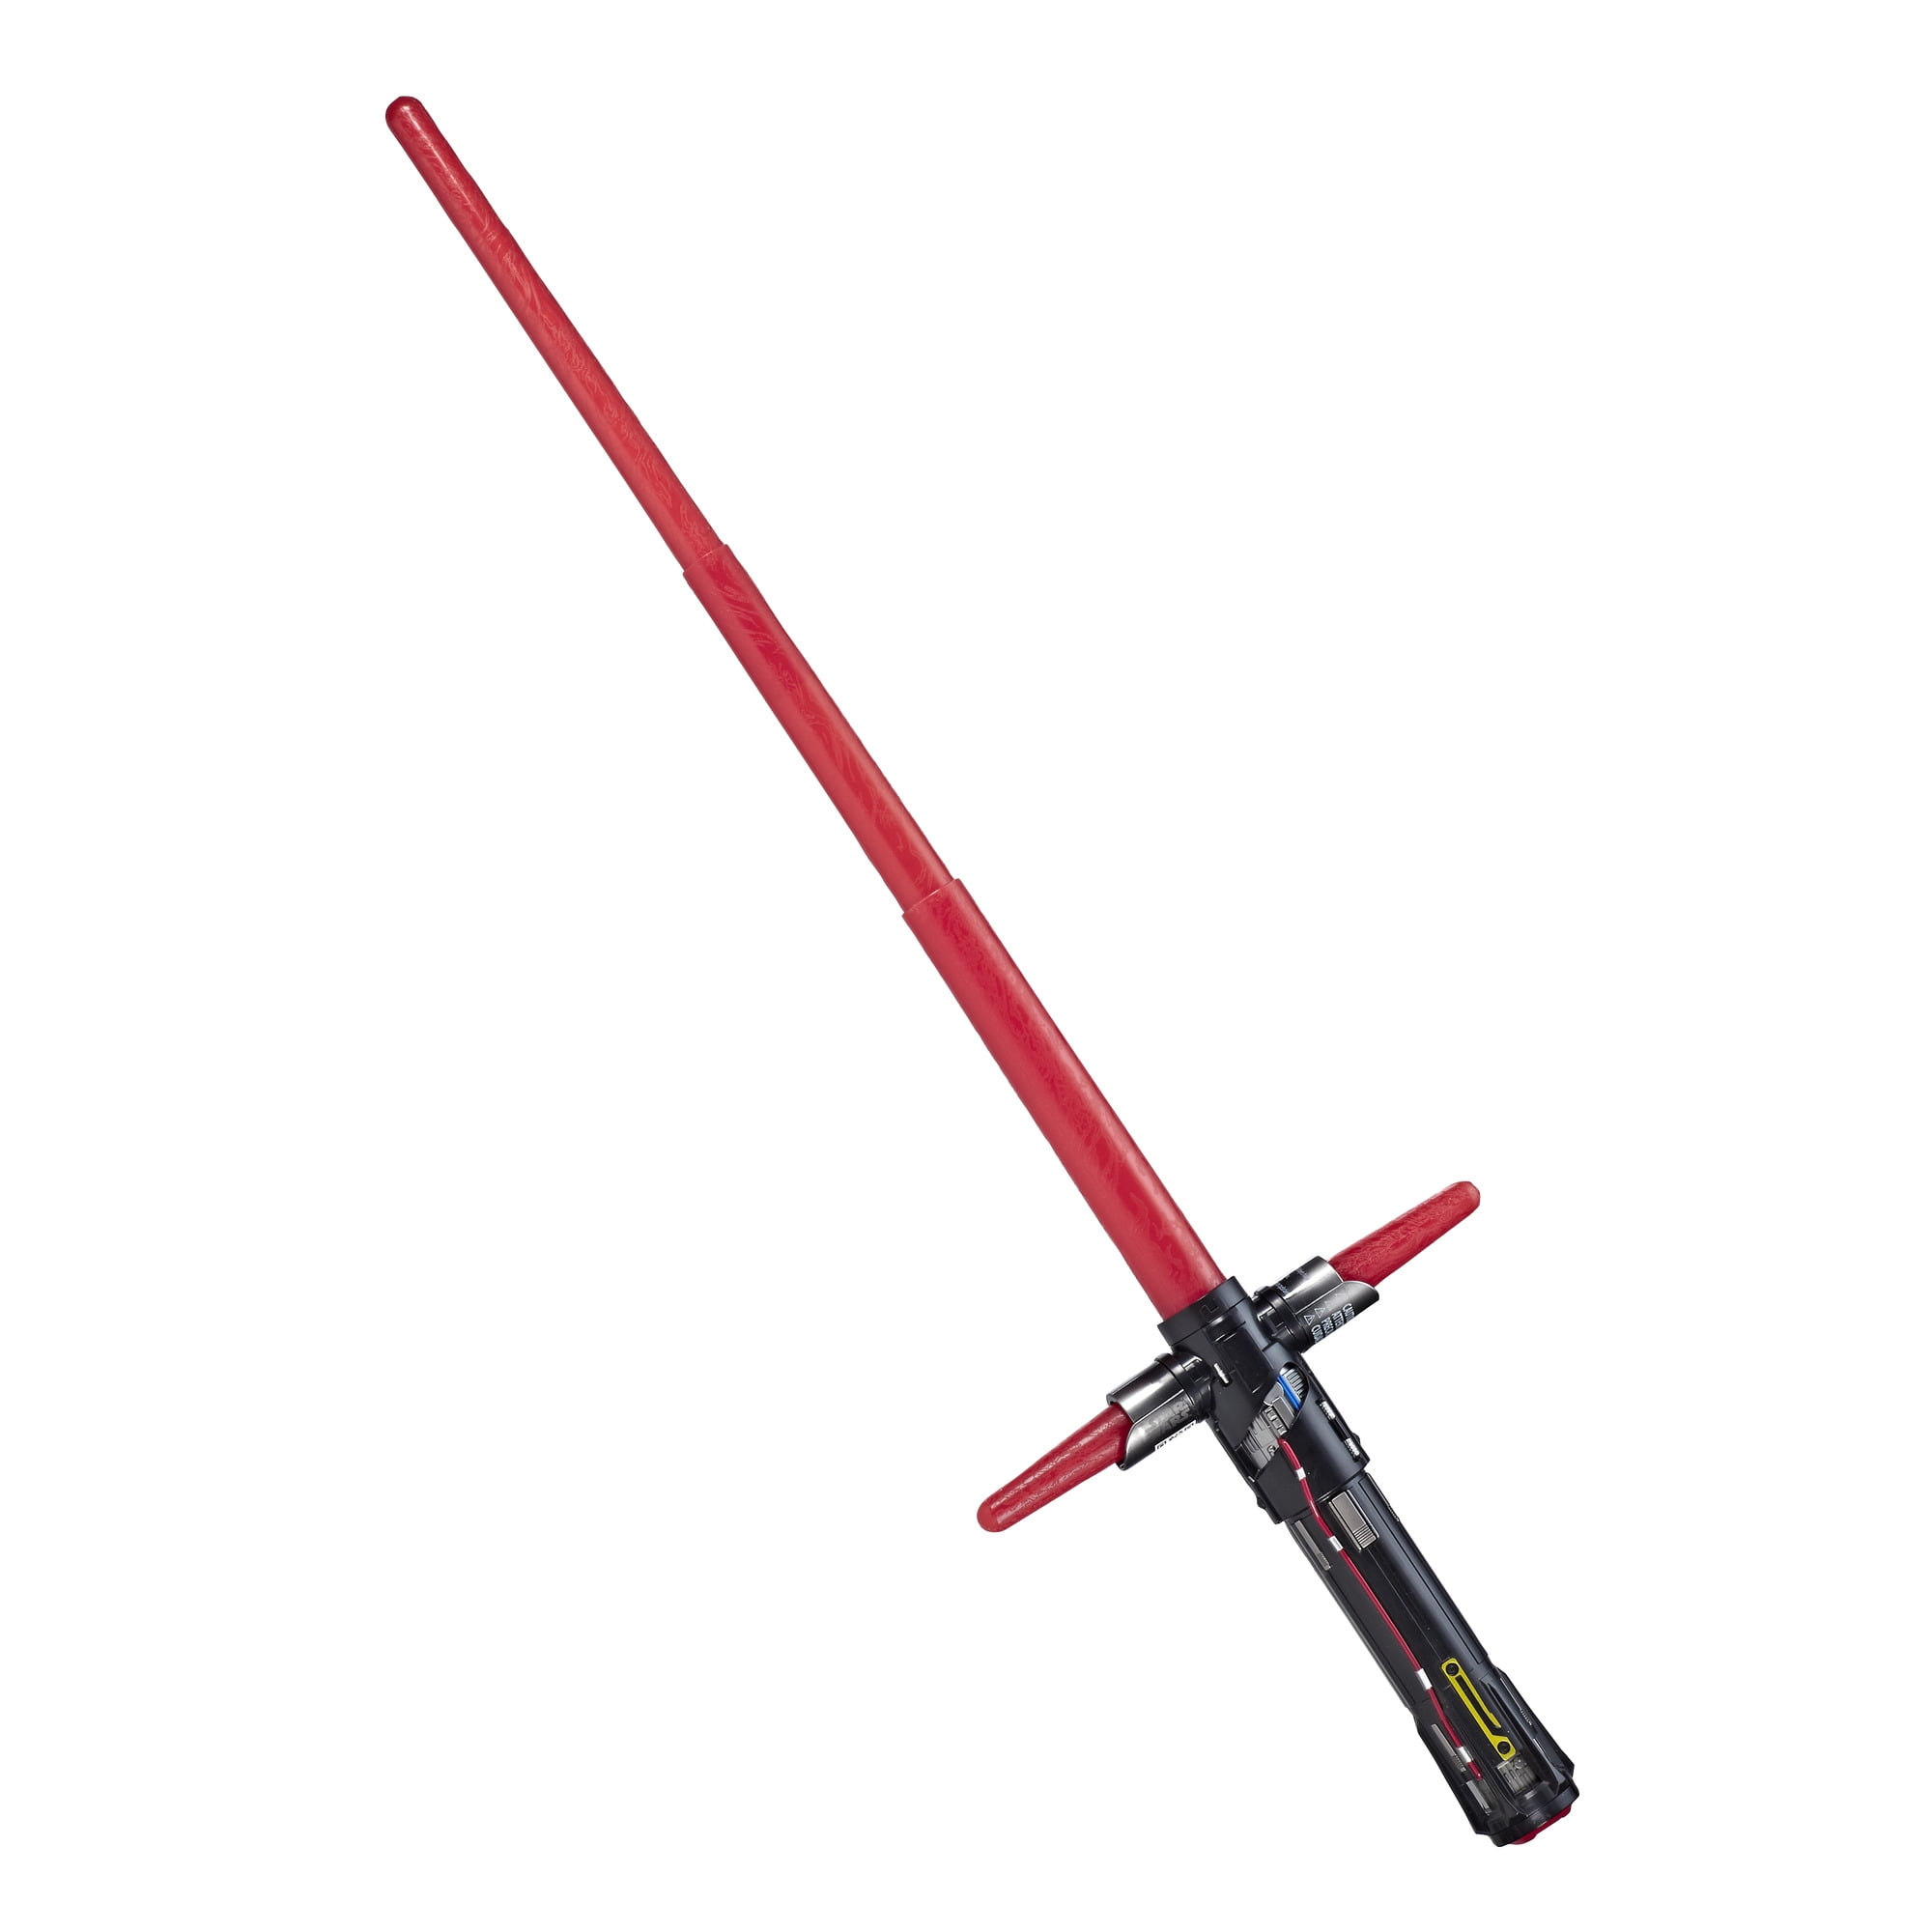 NEW Star Wars Science Toy Kylo Ren Mini Lightsaber Lab Two Stage Red Light-up 